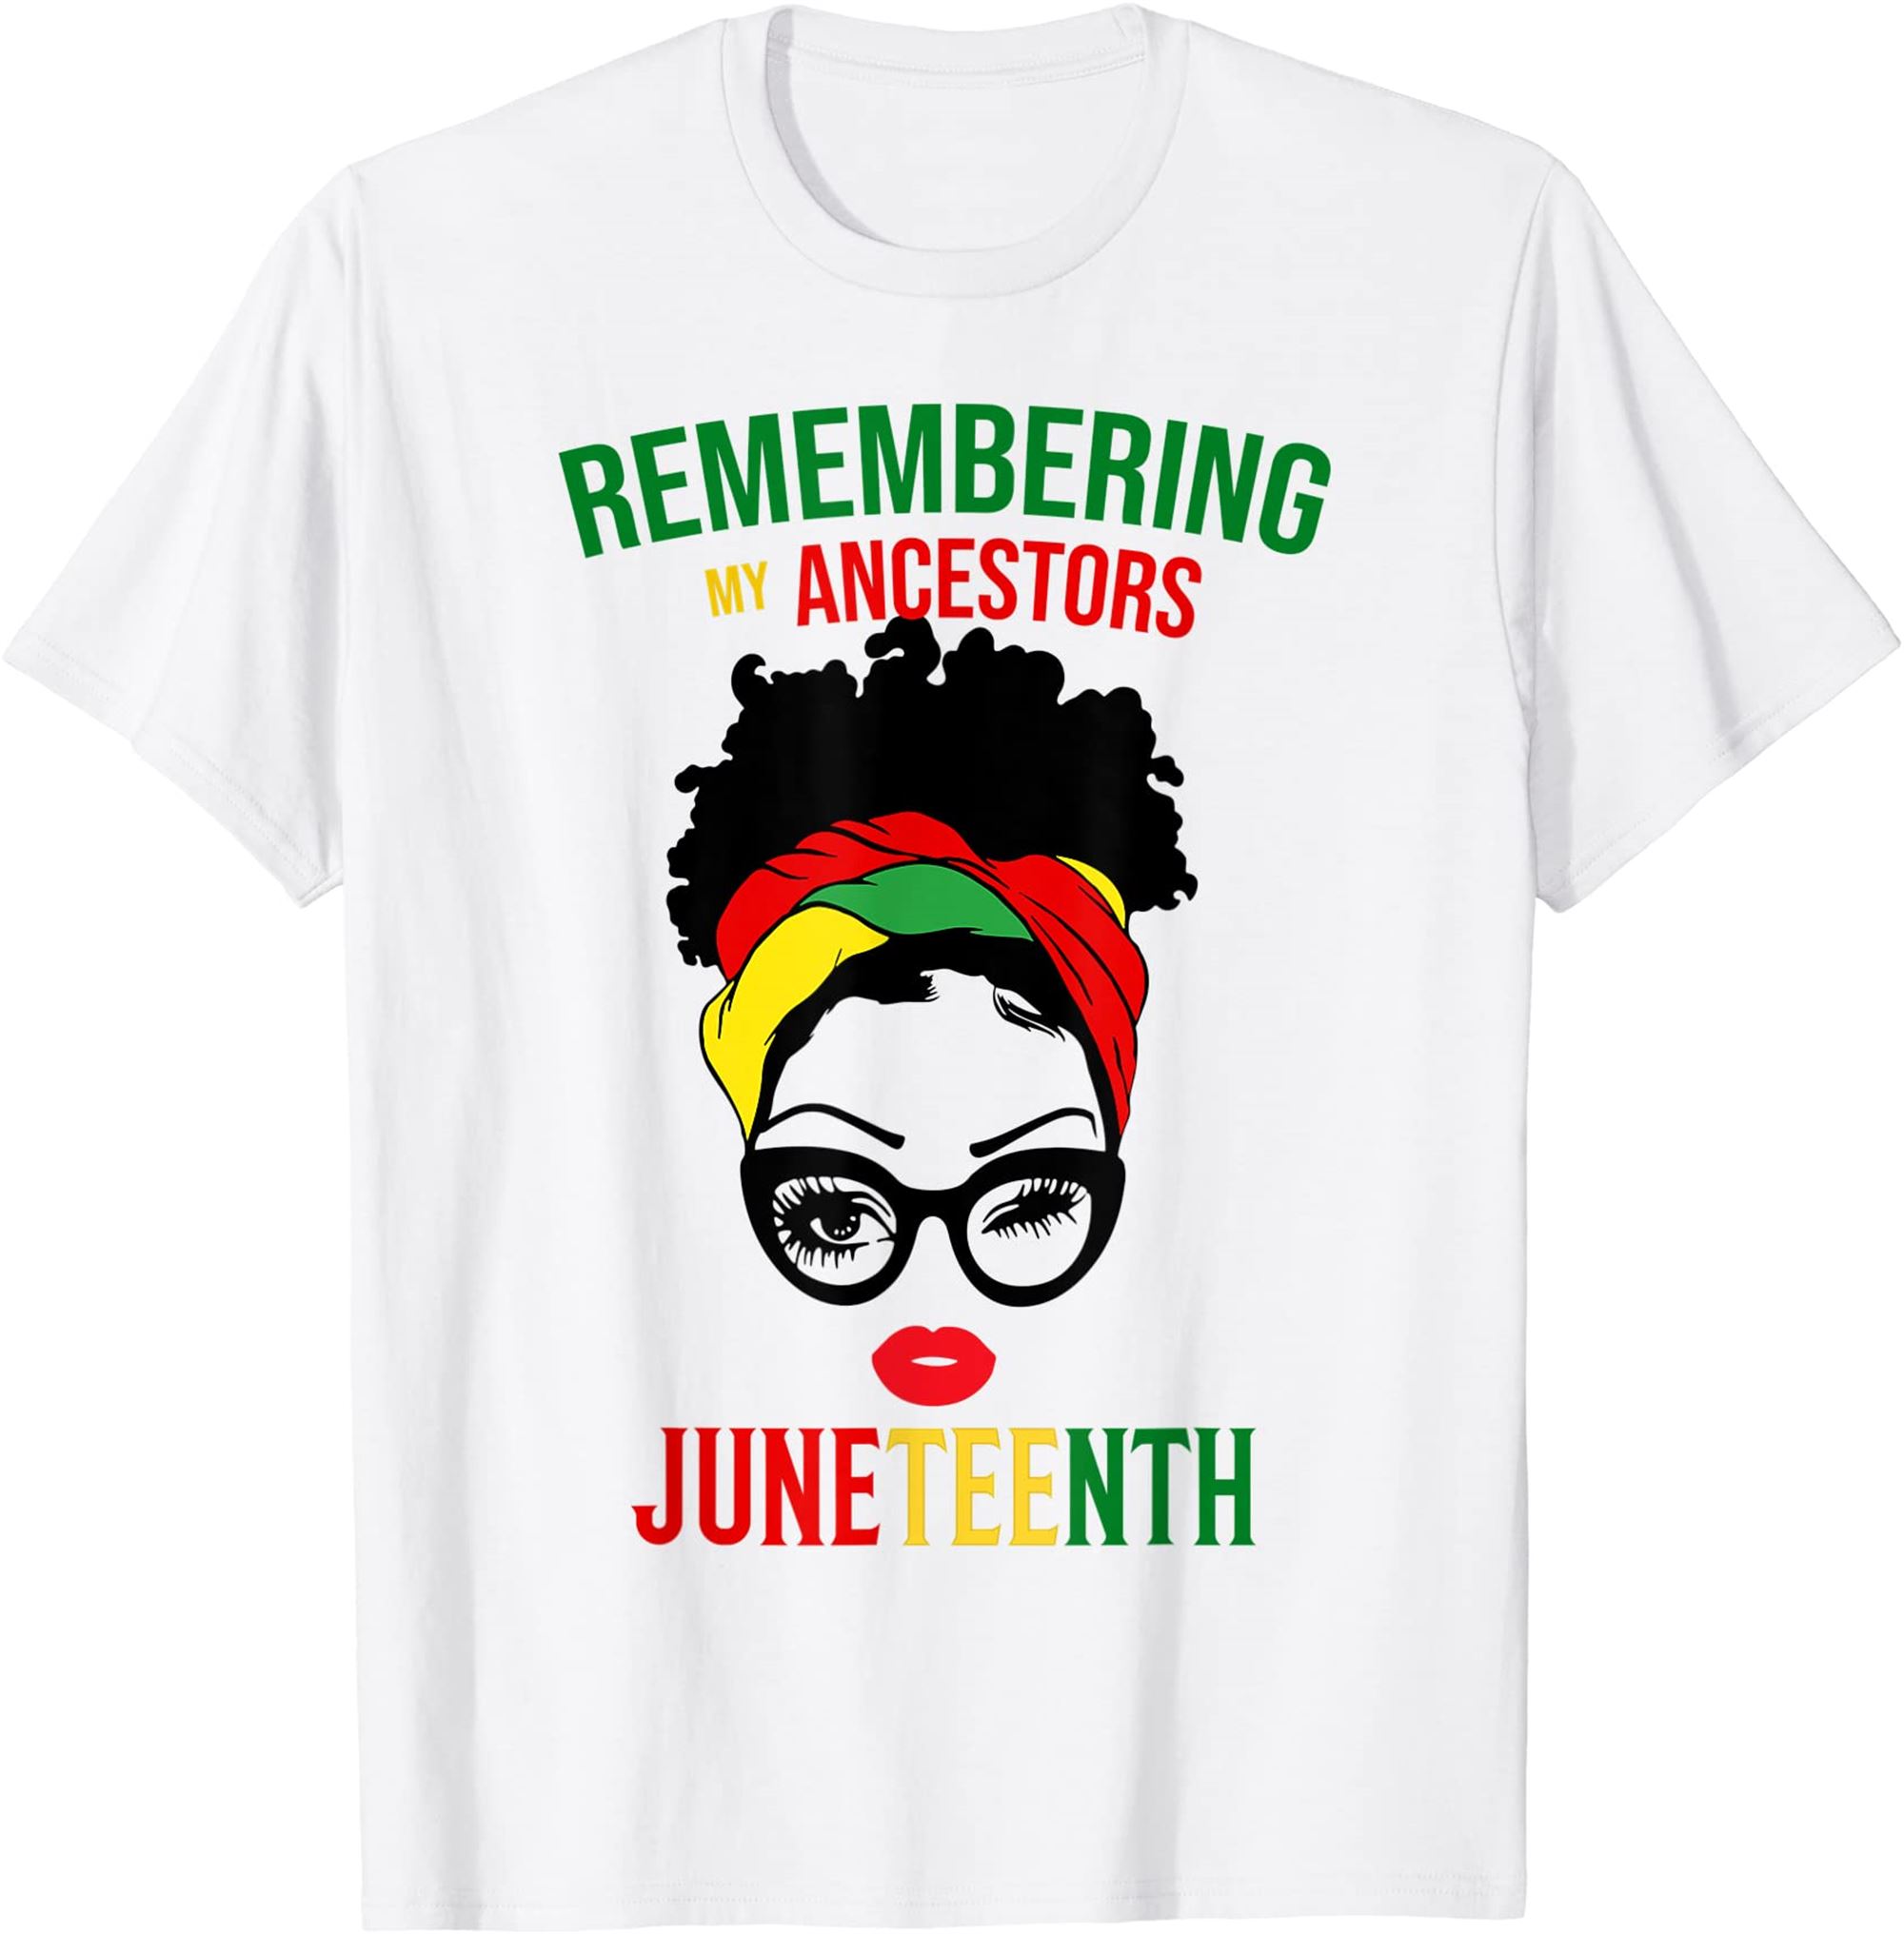 Remembering My Ancestors Juneteenth Black Freedom 1865 Gifts T-shirt Plus Size Up To 5xl